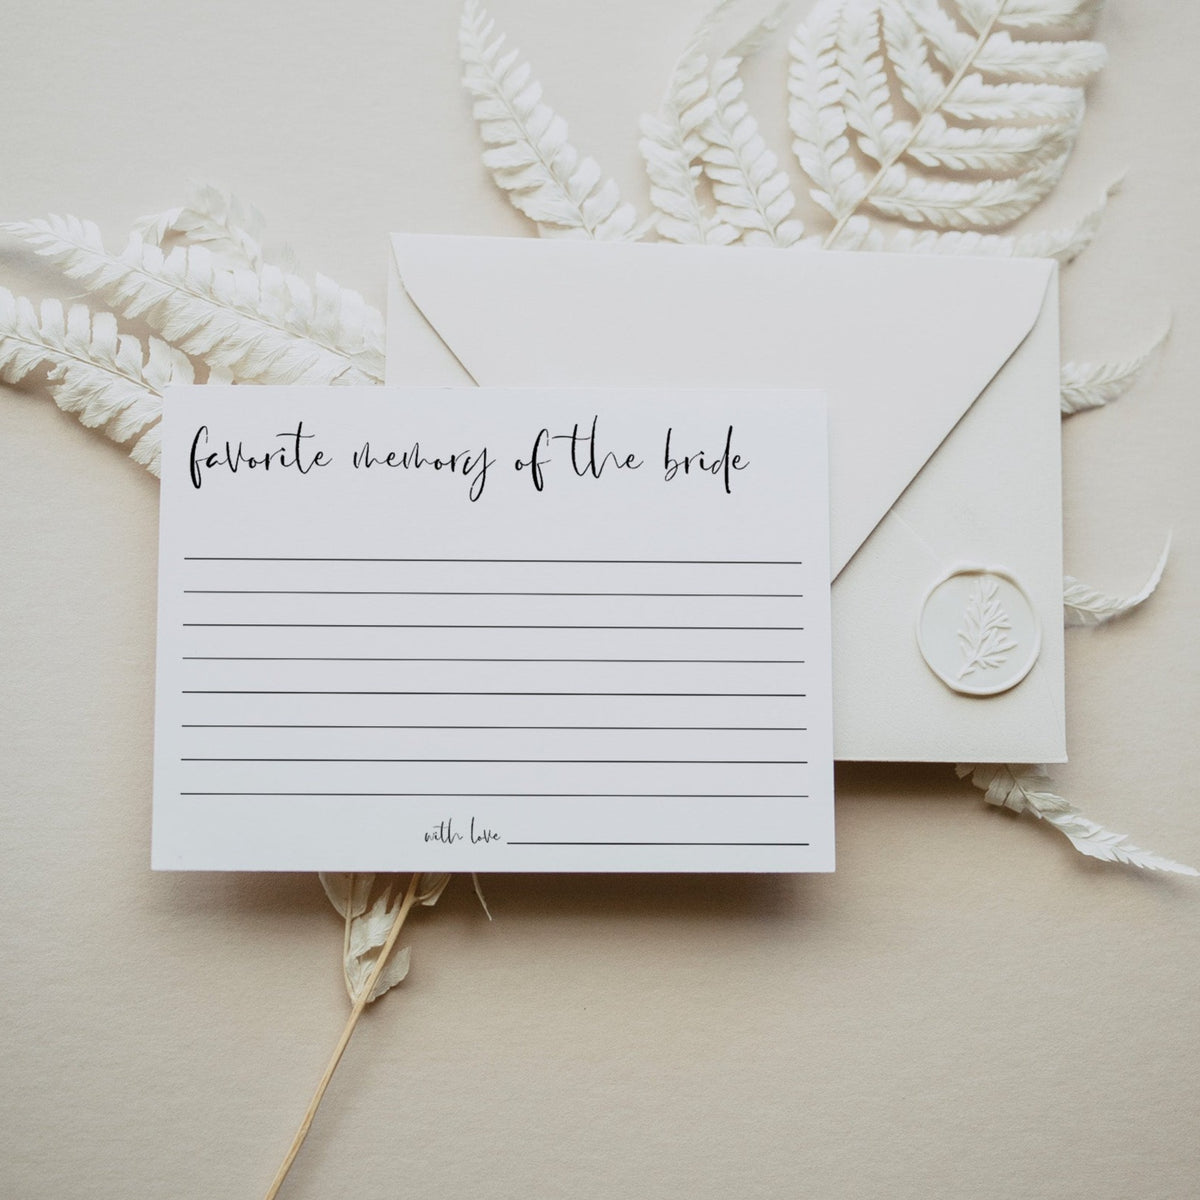 Fully editable and printable bridal shower favorite memory with the bride game with a modern minimalist design. Perfect for a modern simple bridal shower themed party